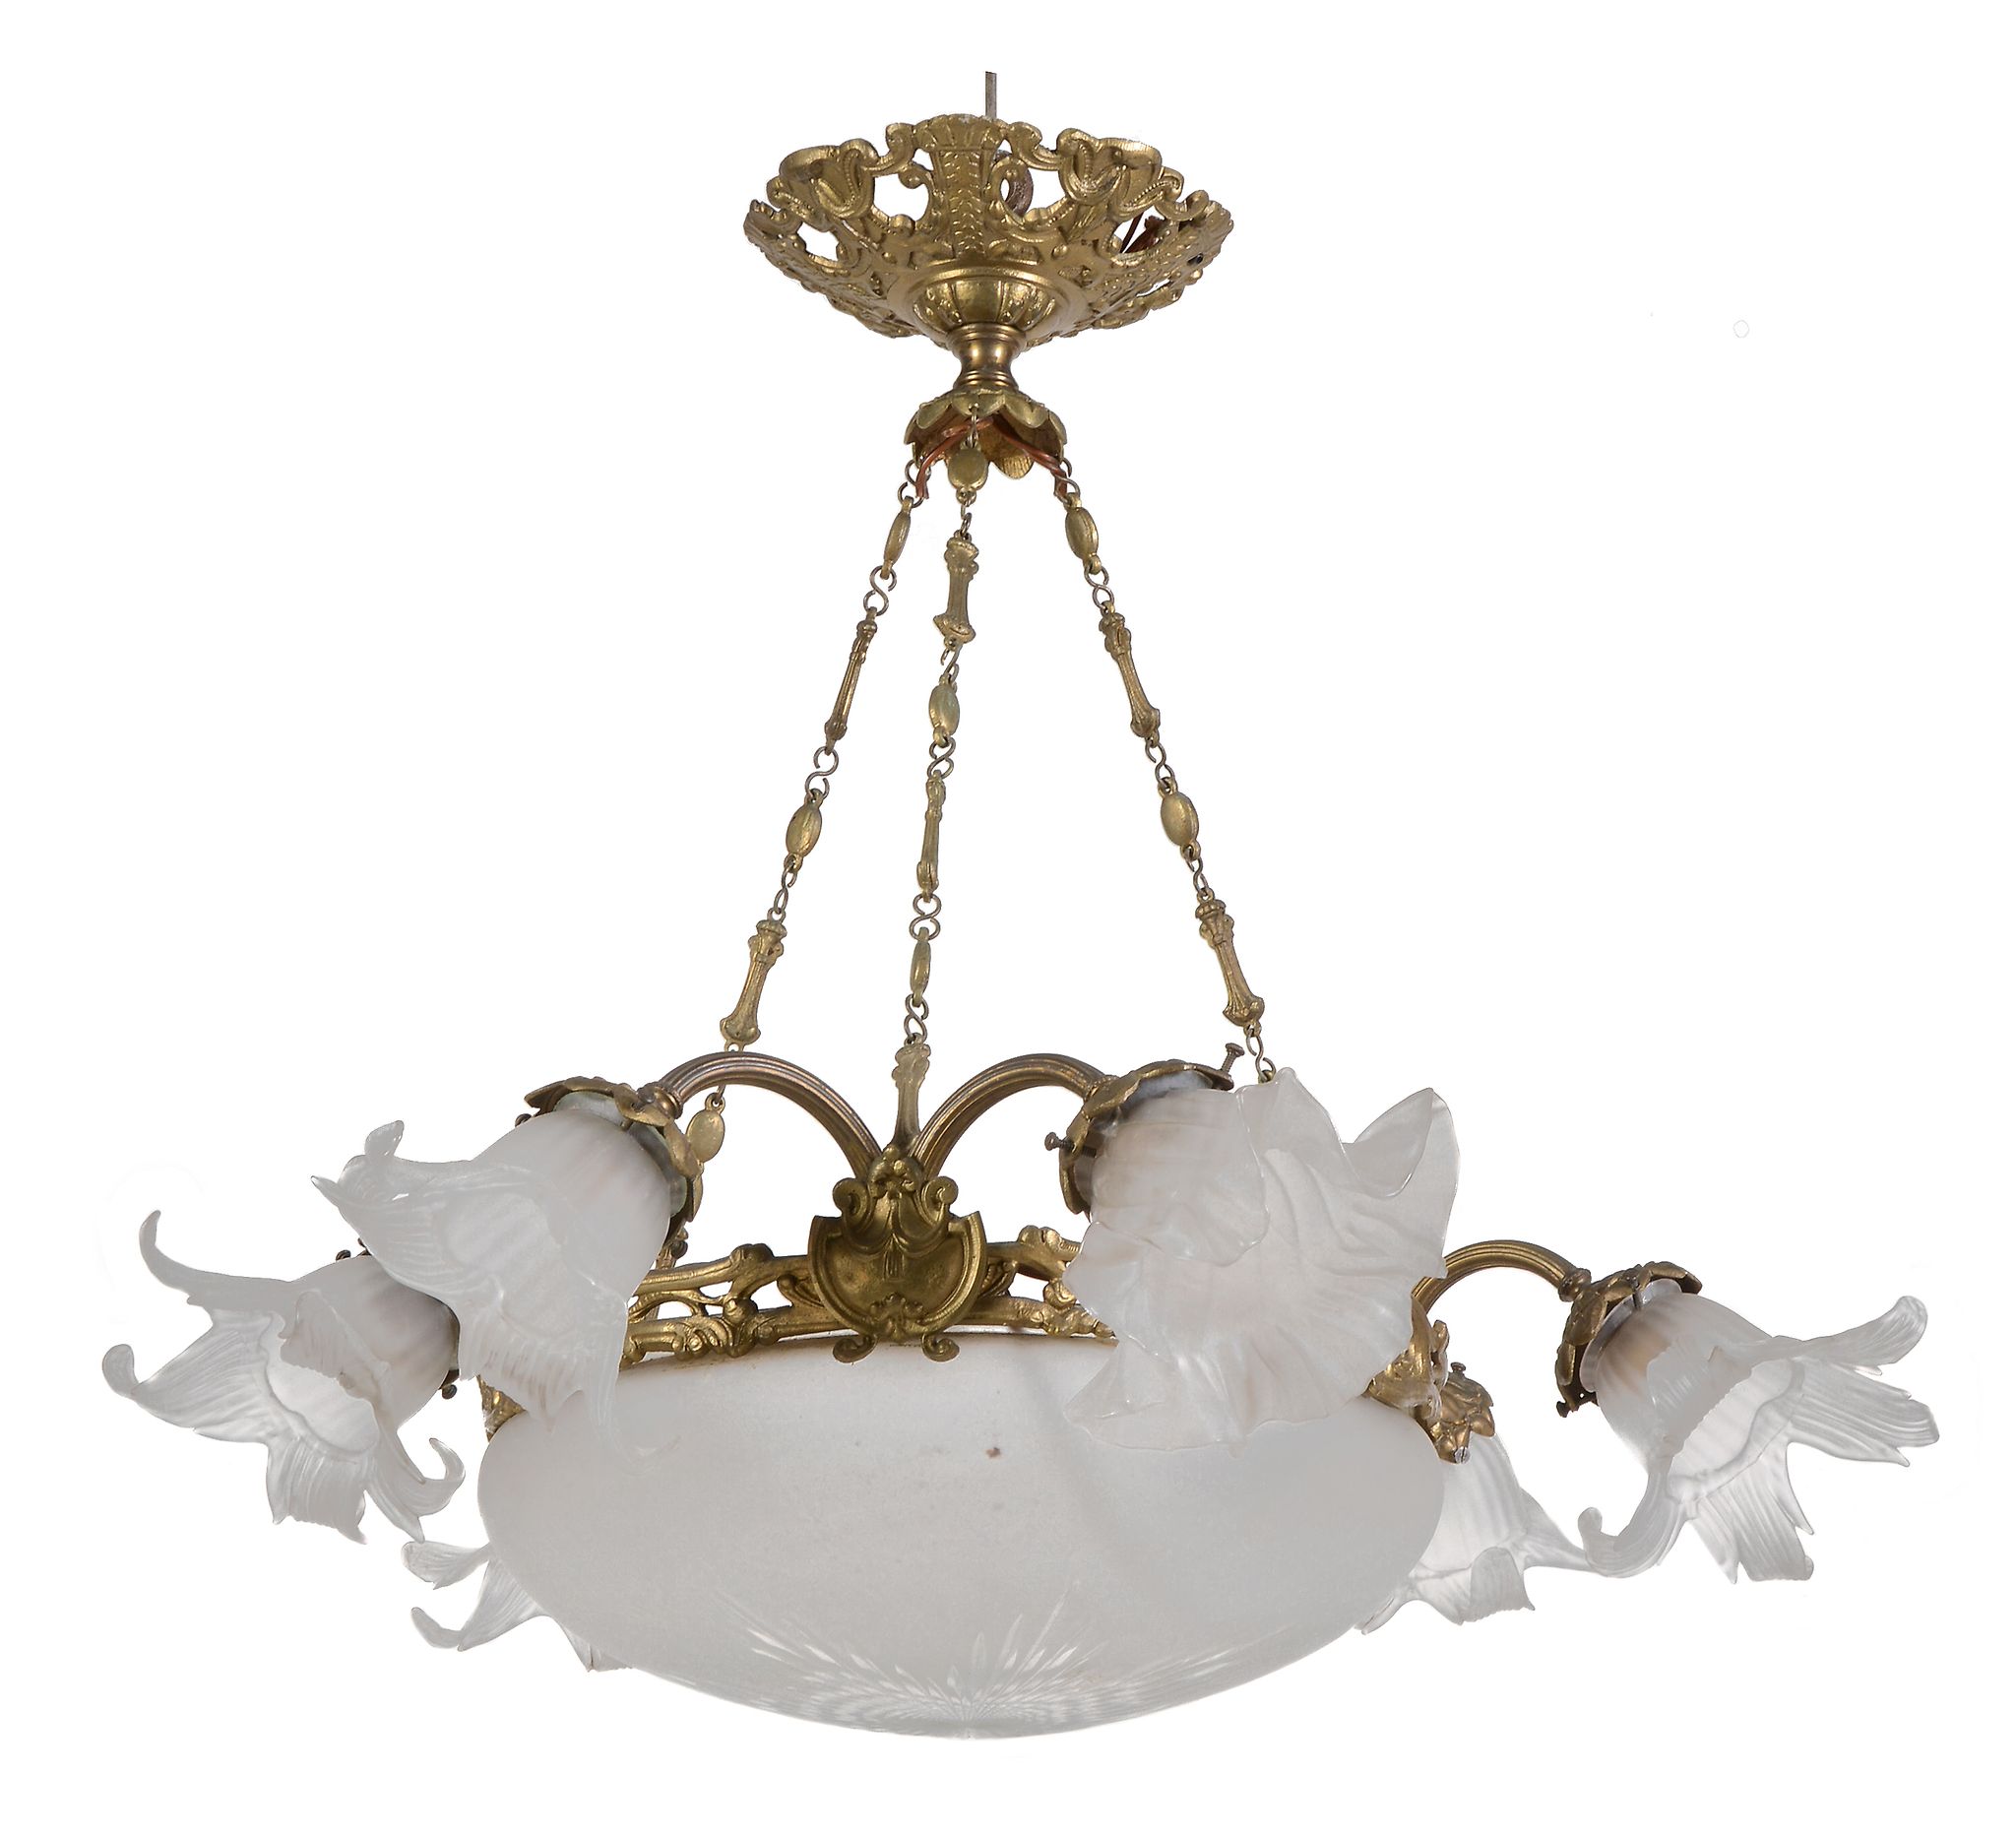 A French moulded and cut glass and gilt bronze mounted six branch electrolier, circa 1910, the